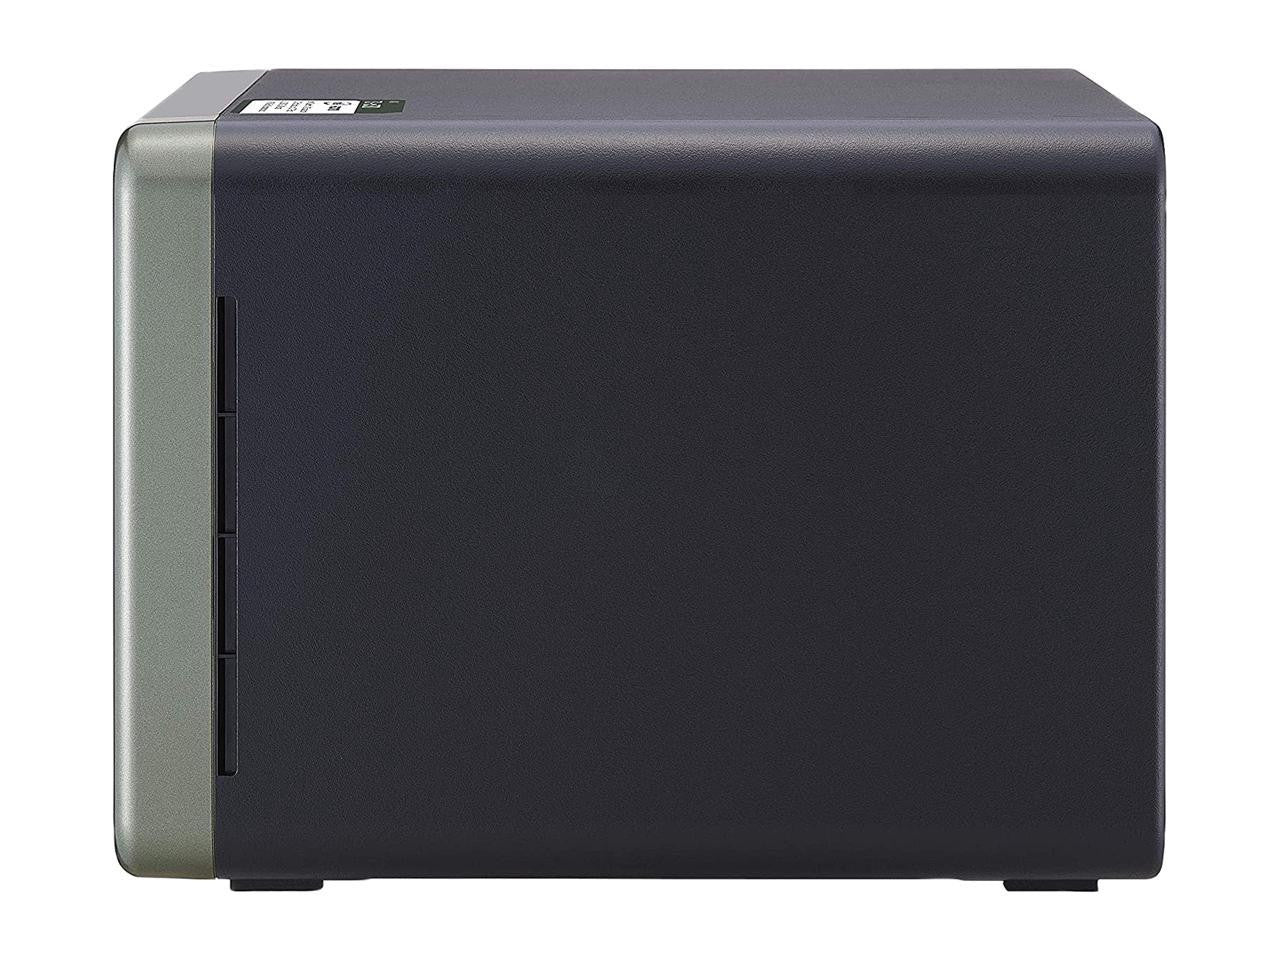 QNAP TS-253D Quad Core 2.7Ghz 2-Bay NAS with 4GB RAM and 16TB (2 x 8TB) of Seagate Ironwolf NAS Drives Fully Assembled and Tested By CustomTechSales